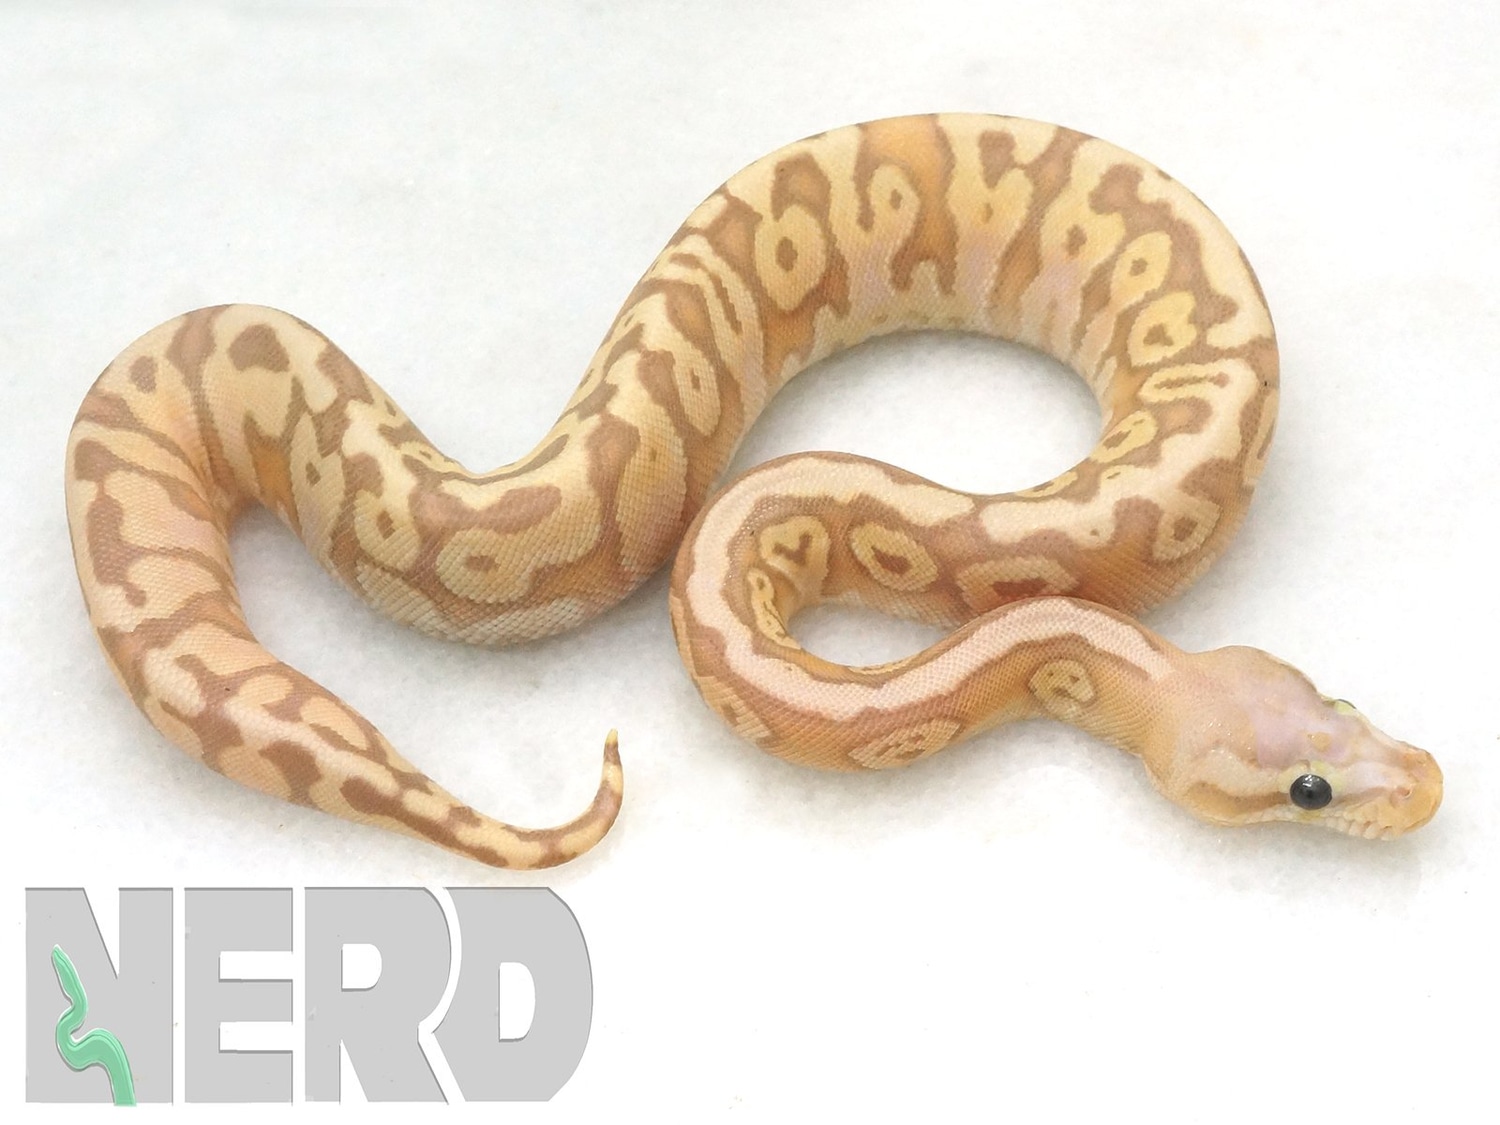 Coral Glow Hidden Gene Woma Micro Scale Ball Python by New England Reptile Distributors